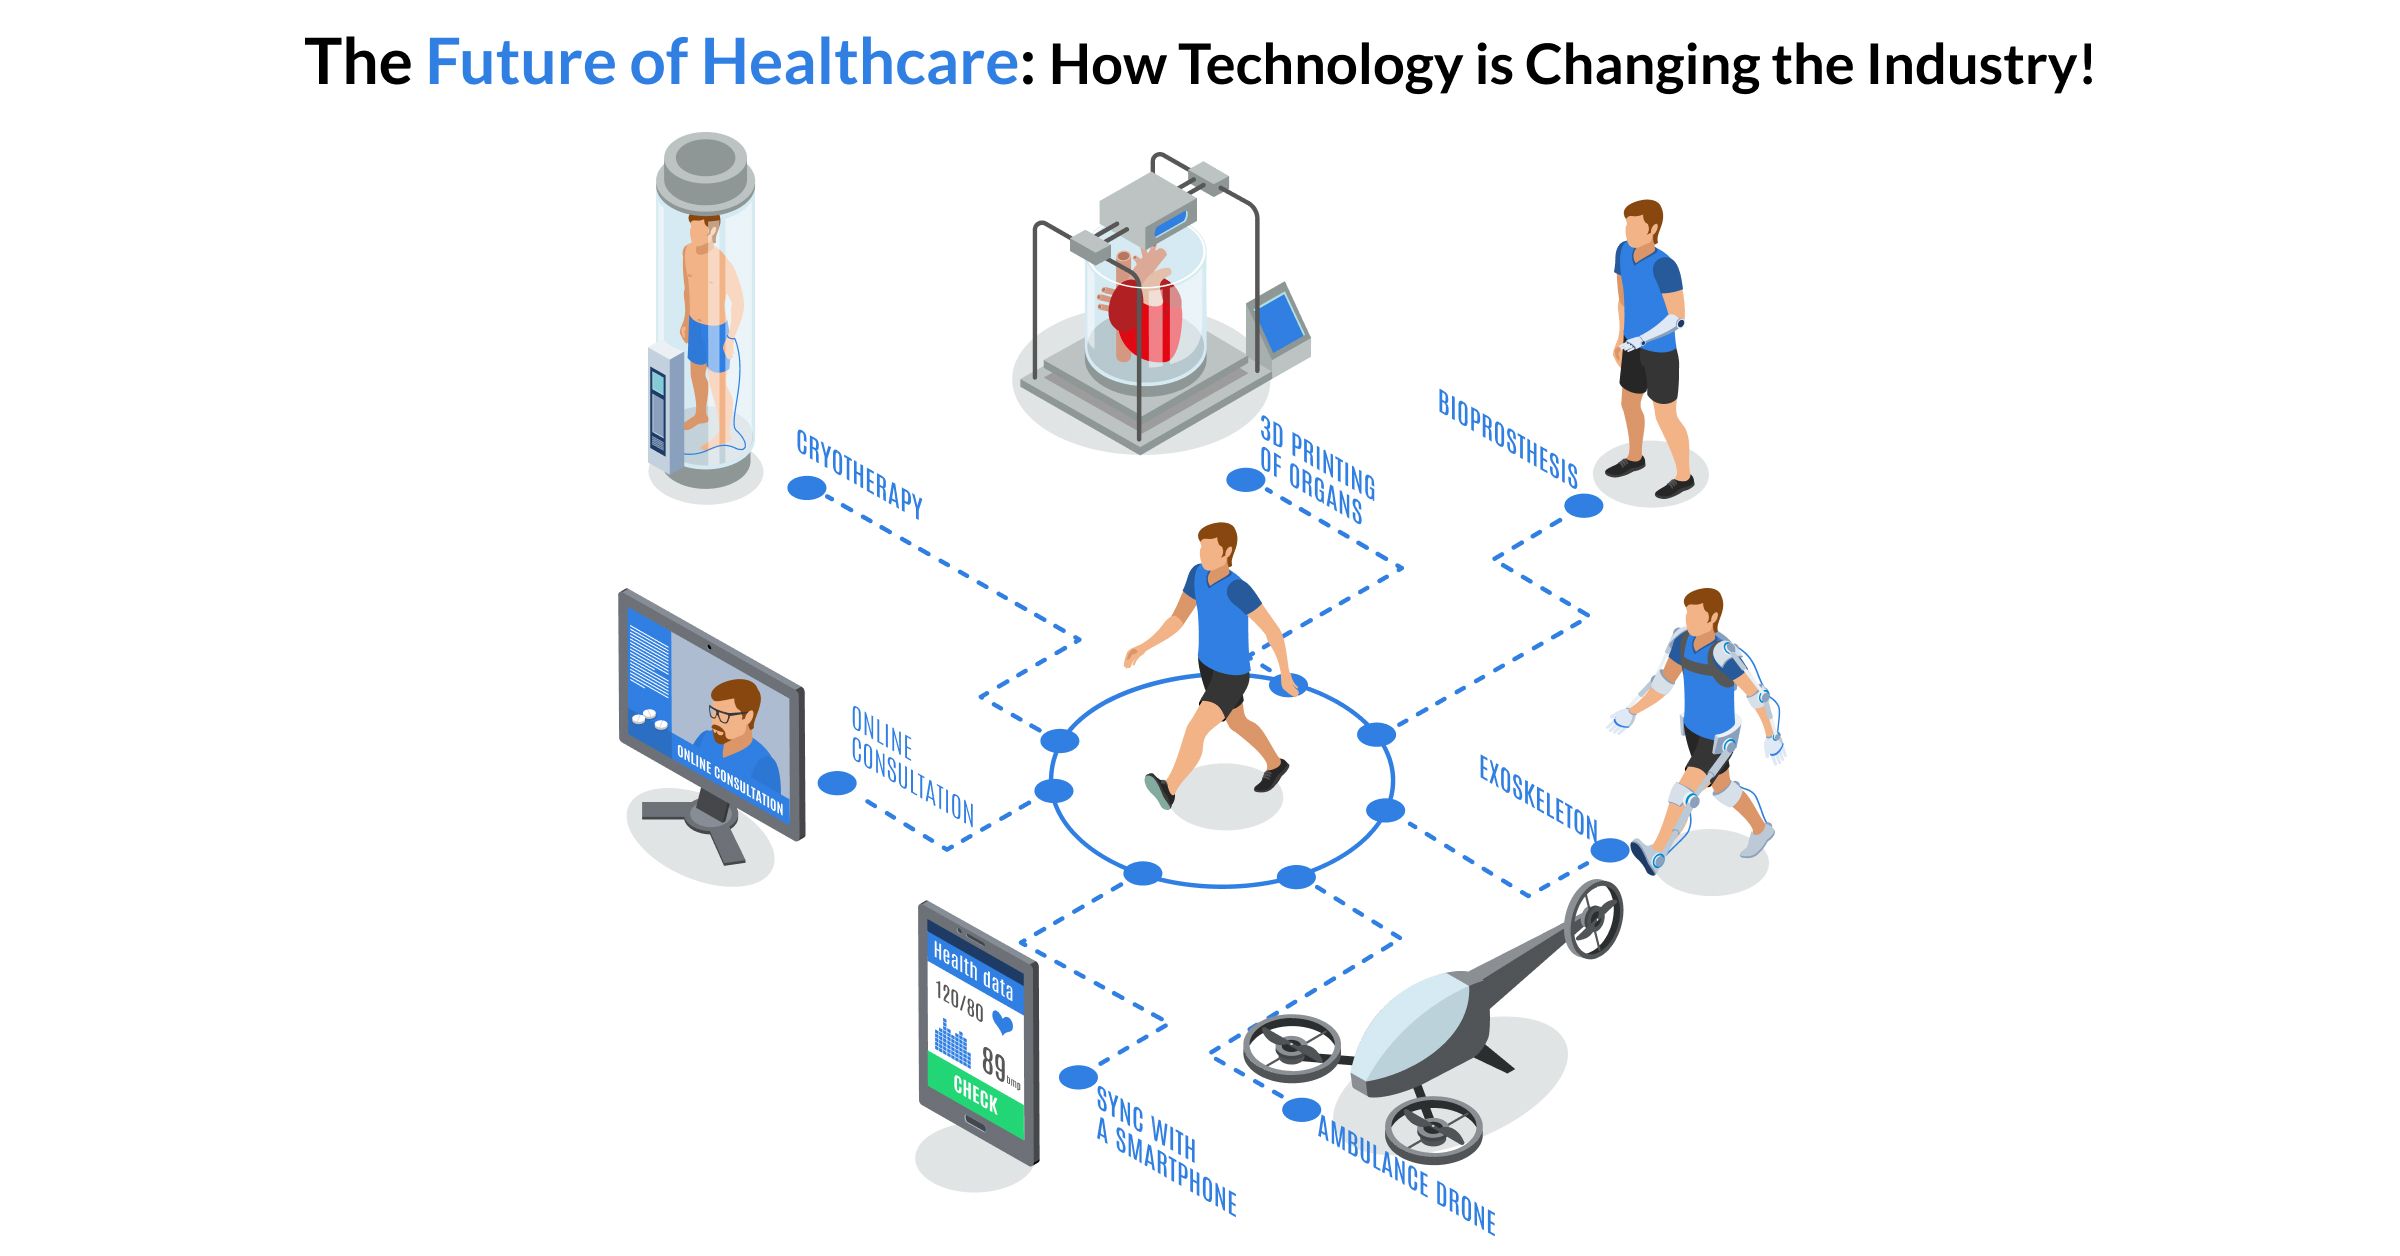 The future of healthcare: How technology is changing the industry!